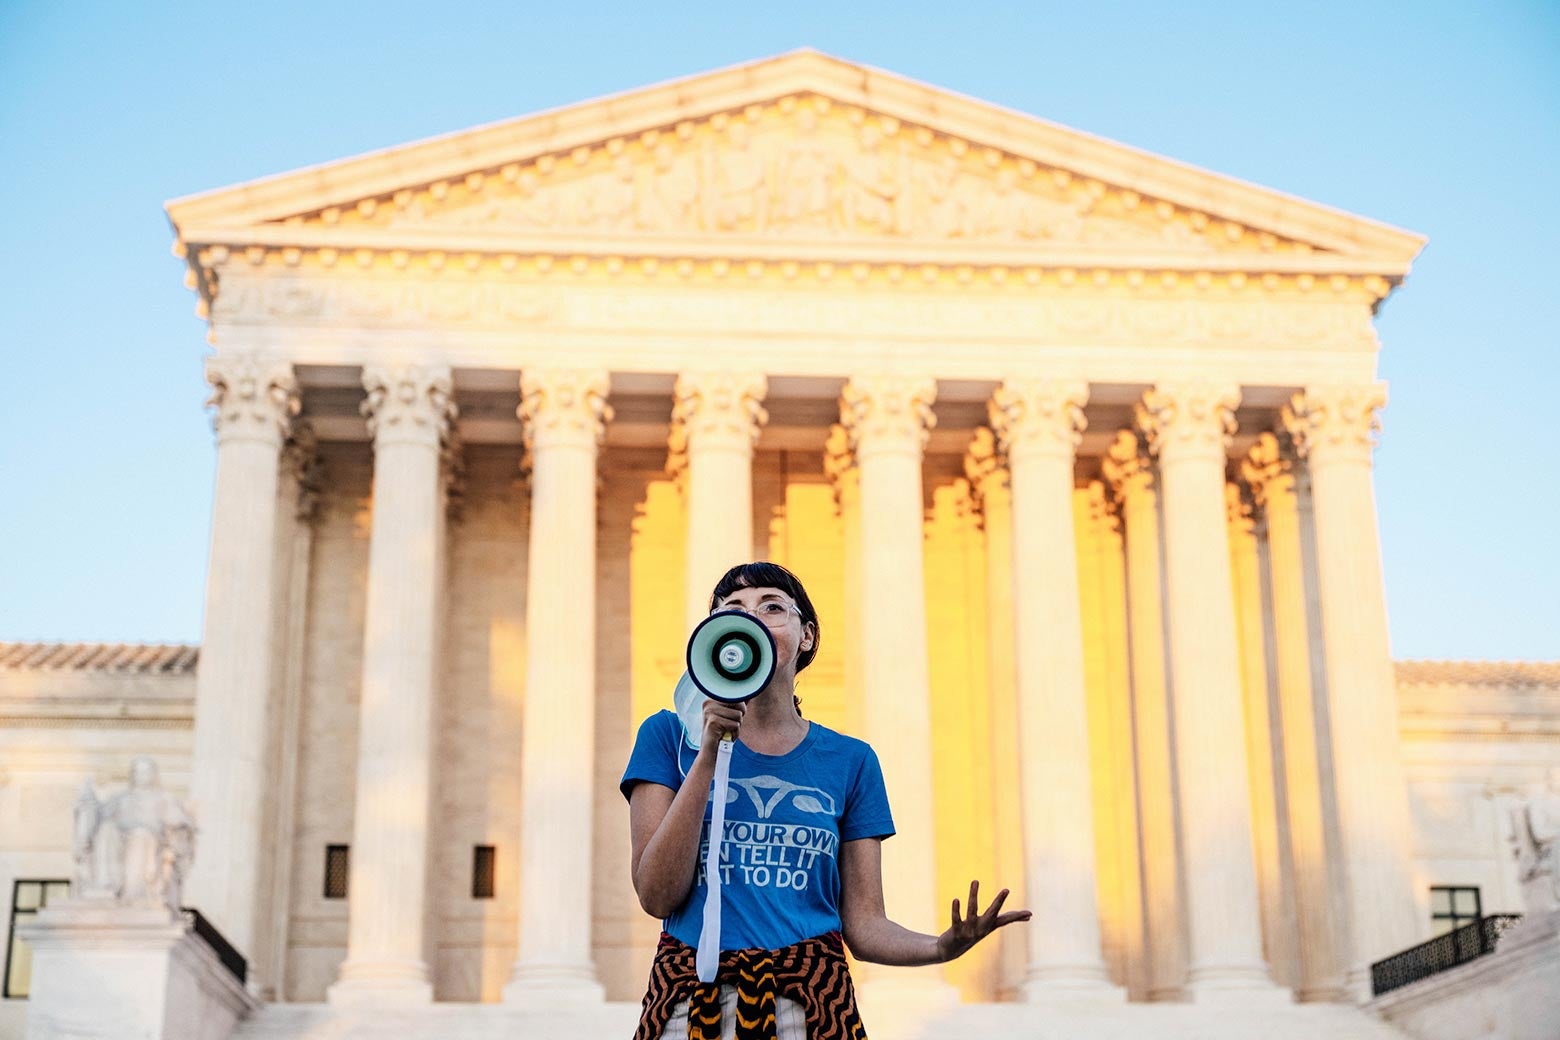 A protester speaks through a megaphone against a majestic view of the Supreme Court.